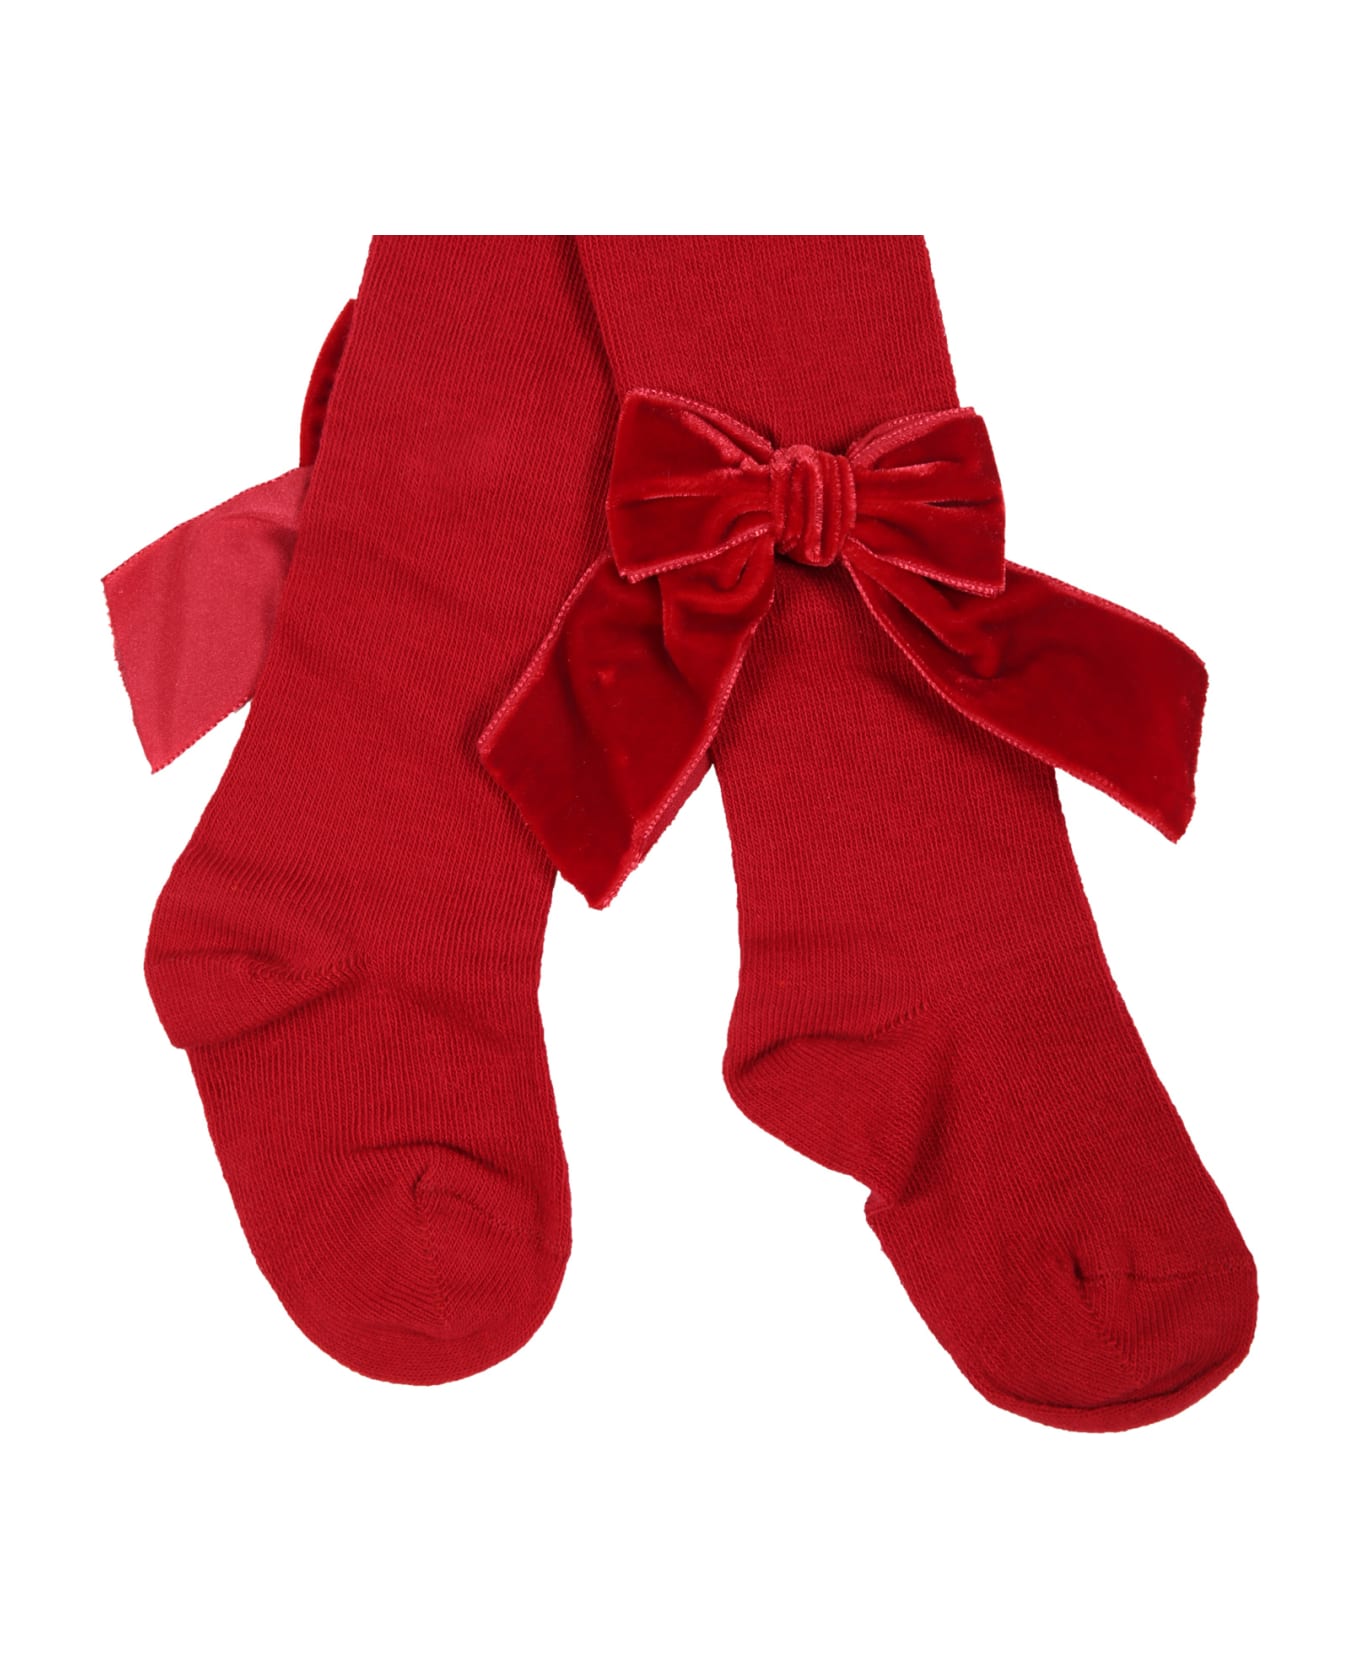 Story loris Red Tights For Baby Girl With Velvet Bows - Red